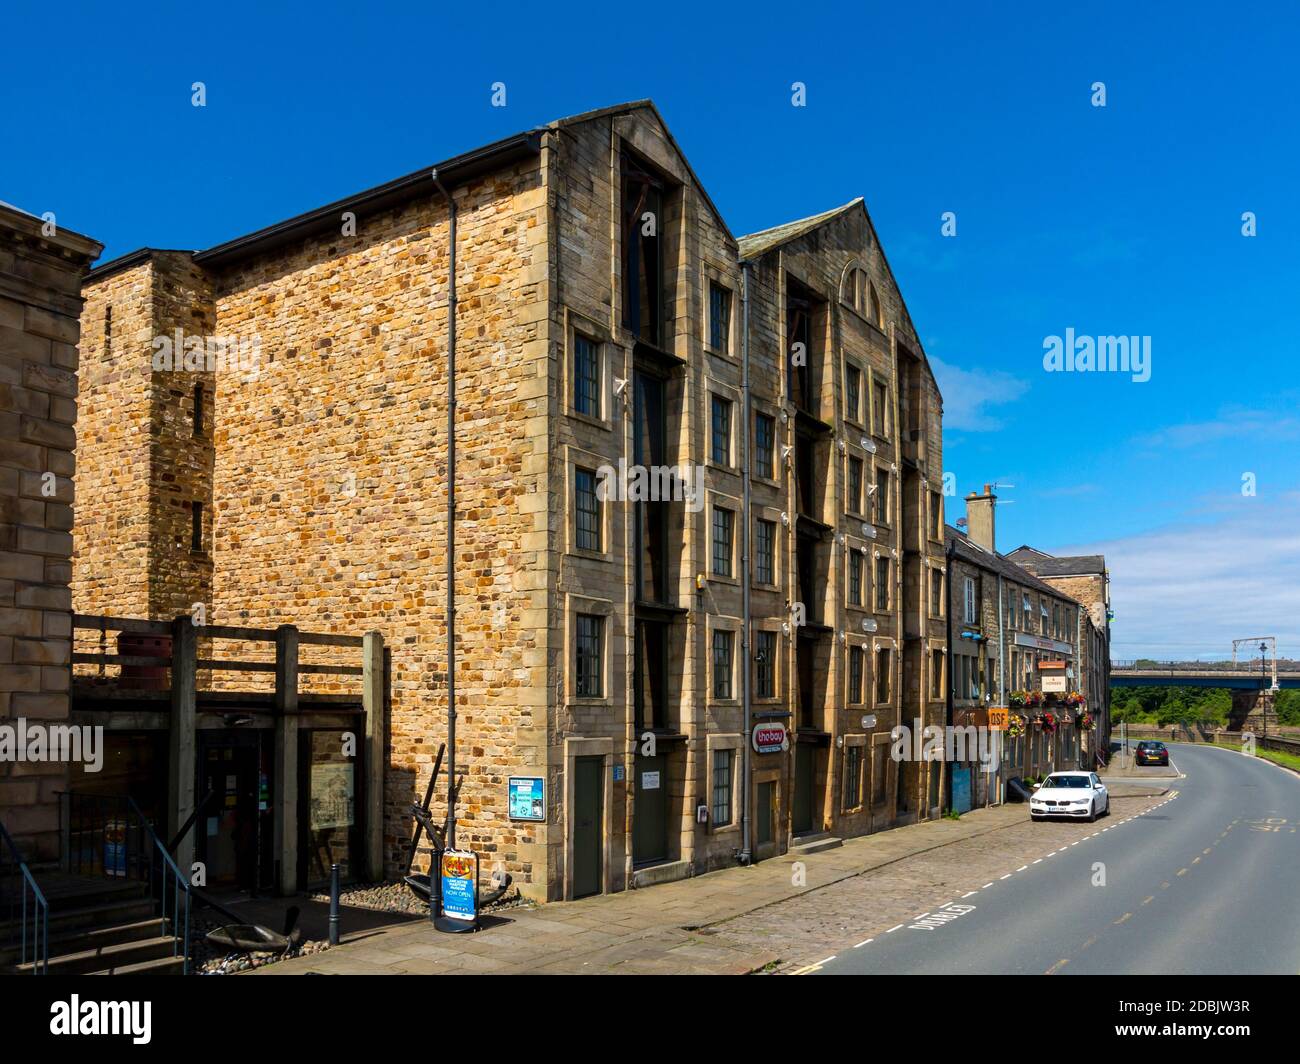 Historic buildings in St George's Quay Lancaster Lancashire England UK which was built as a harbour in the 1750s when Lancaster was a trading port. Stock Photo